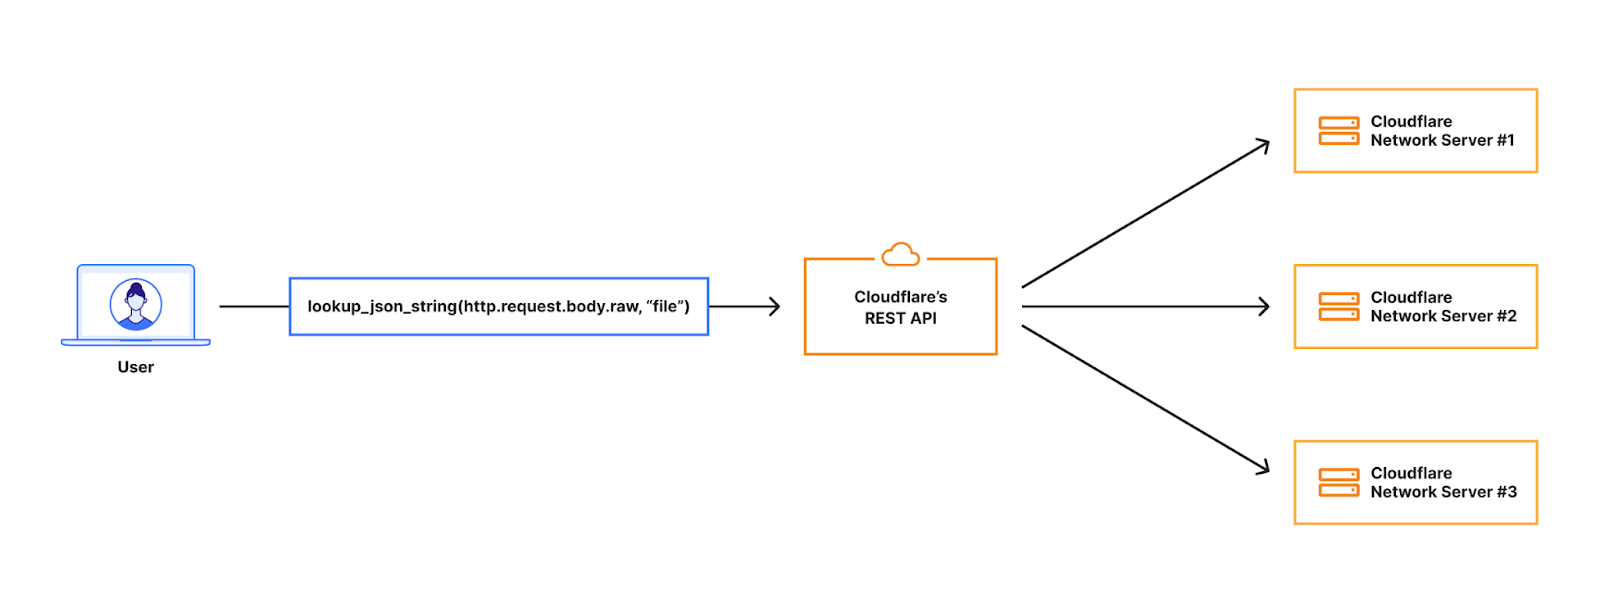 Diagram shows the user request when lookup_json_string configurations is used and Cloudflare’s API distributes the configurations to multiple Cloudflare servers